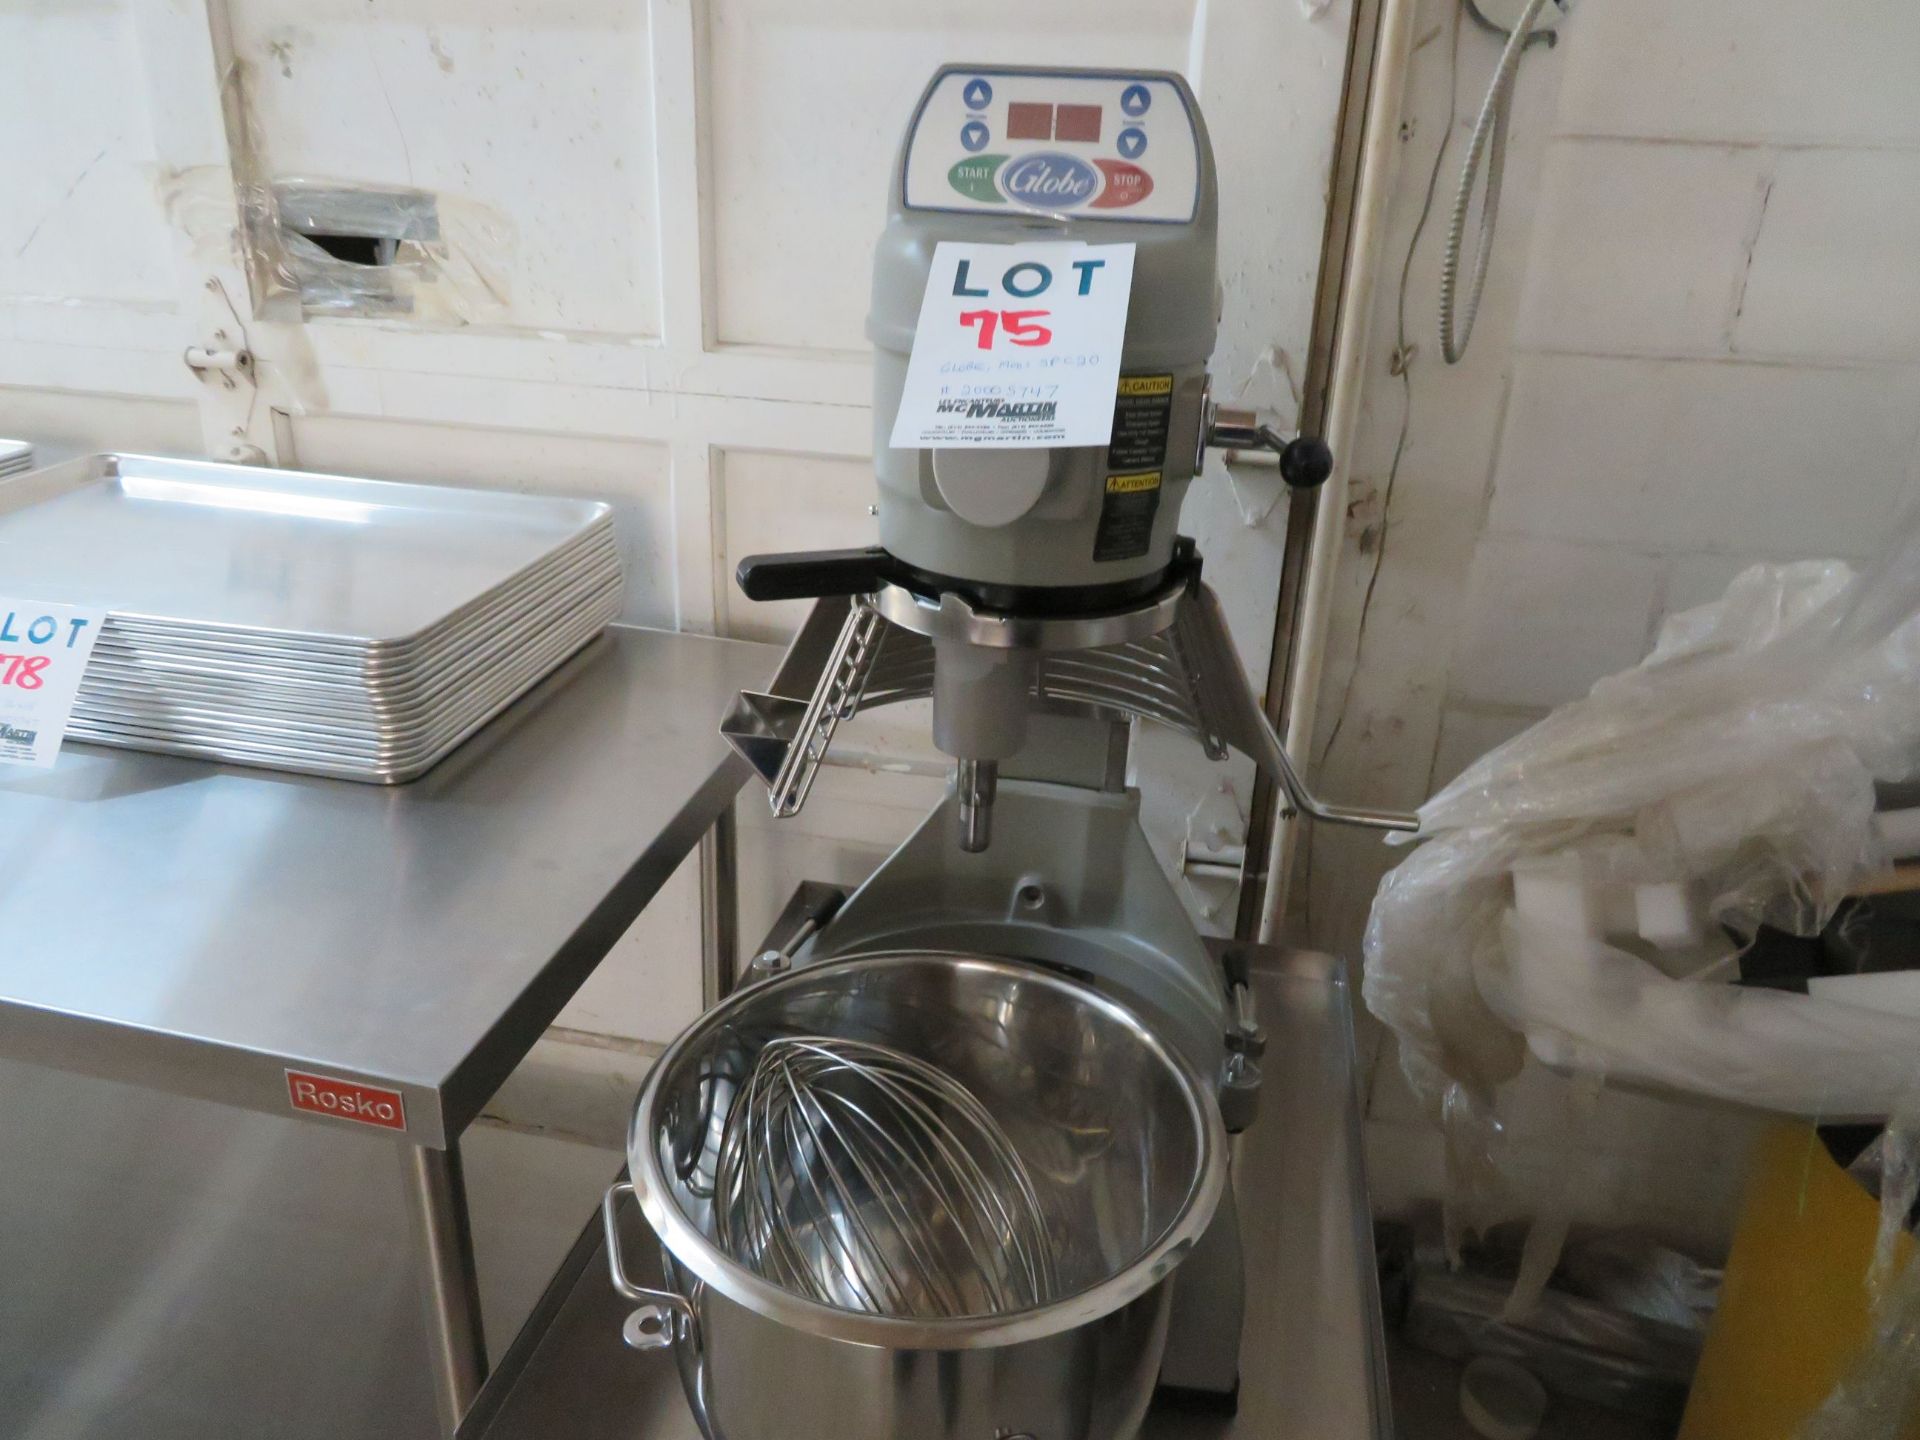 LOT including GLOBE mixer, 20 QT, Mod: SPC20, comes with accessories (PURCHASED NEW $3,200.00) in - Image 2 of 6